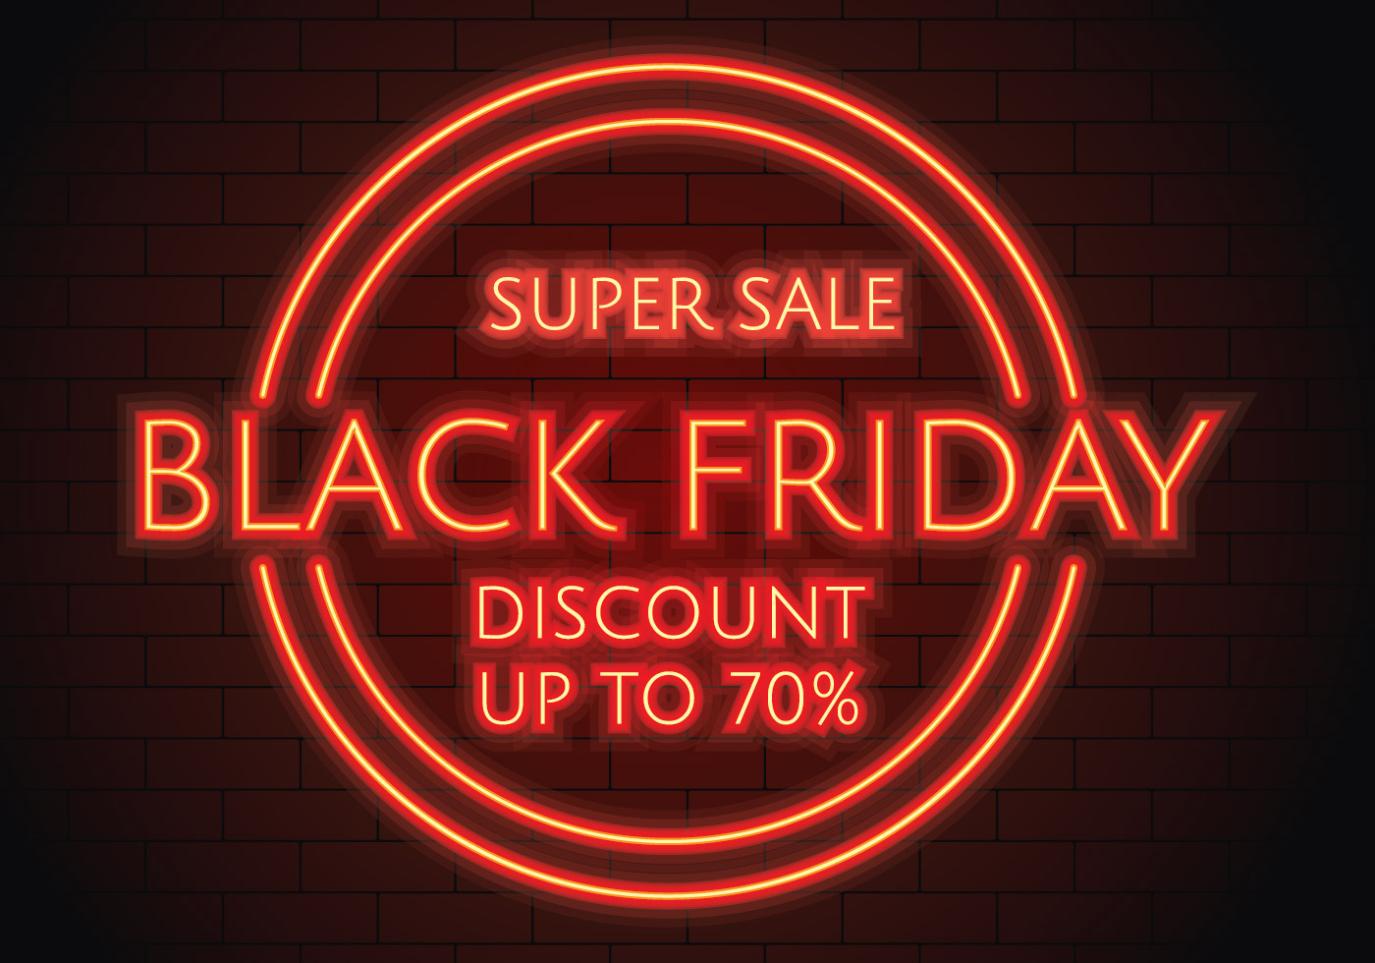 Black Friday Deals: How to Find the Best Deals on Clothing and Accessories?